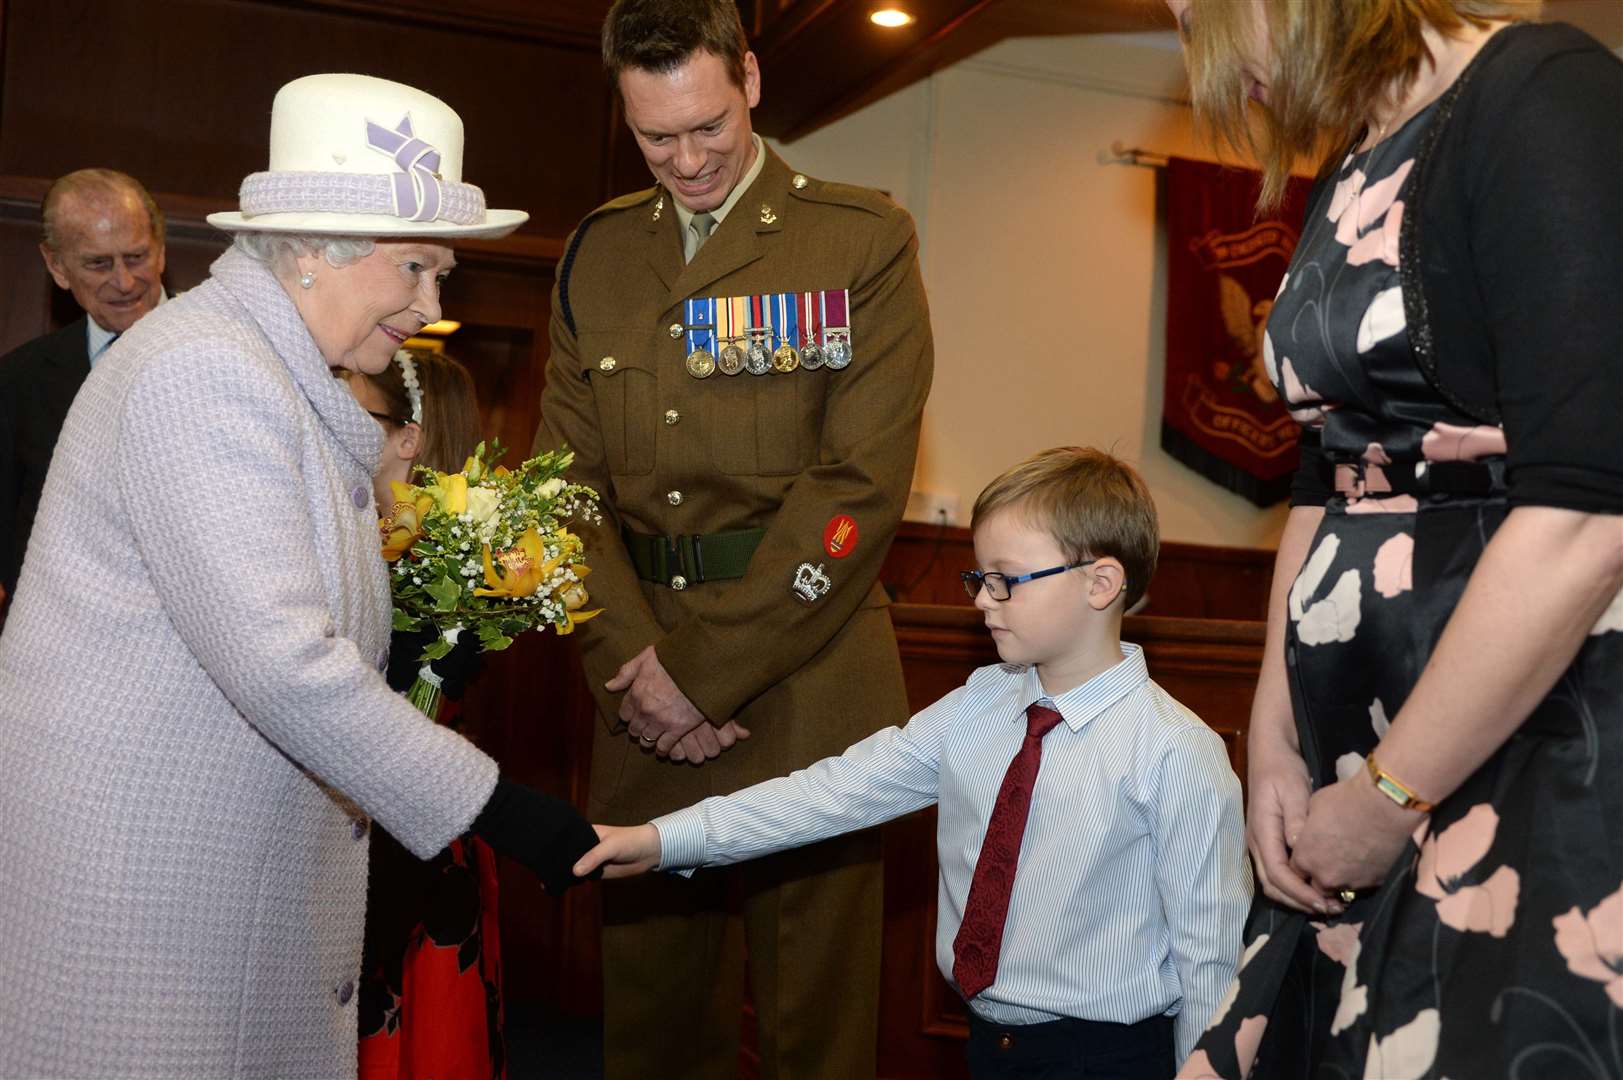 Meeting with families and service personnel before a private luncheon. Photo: The Army Press Office.